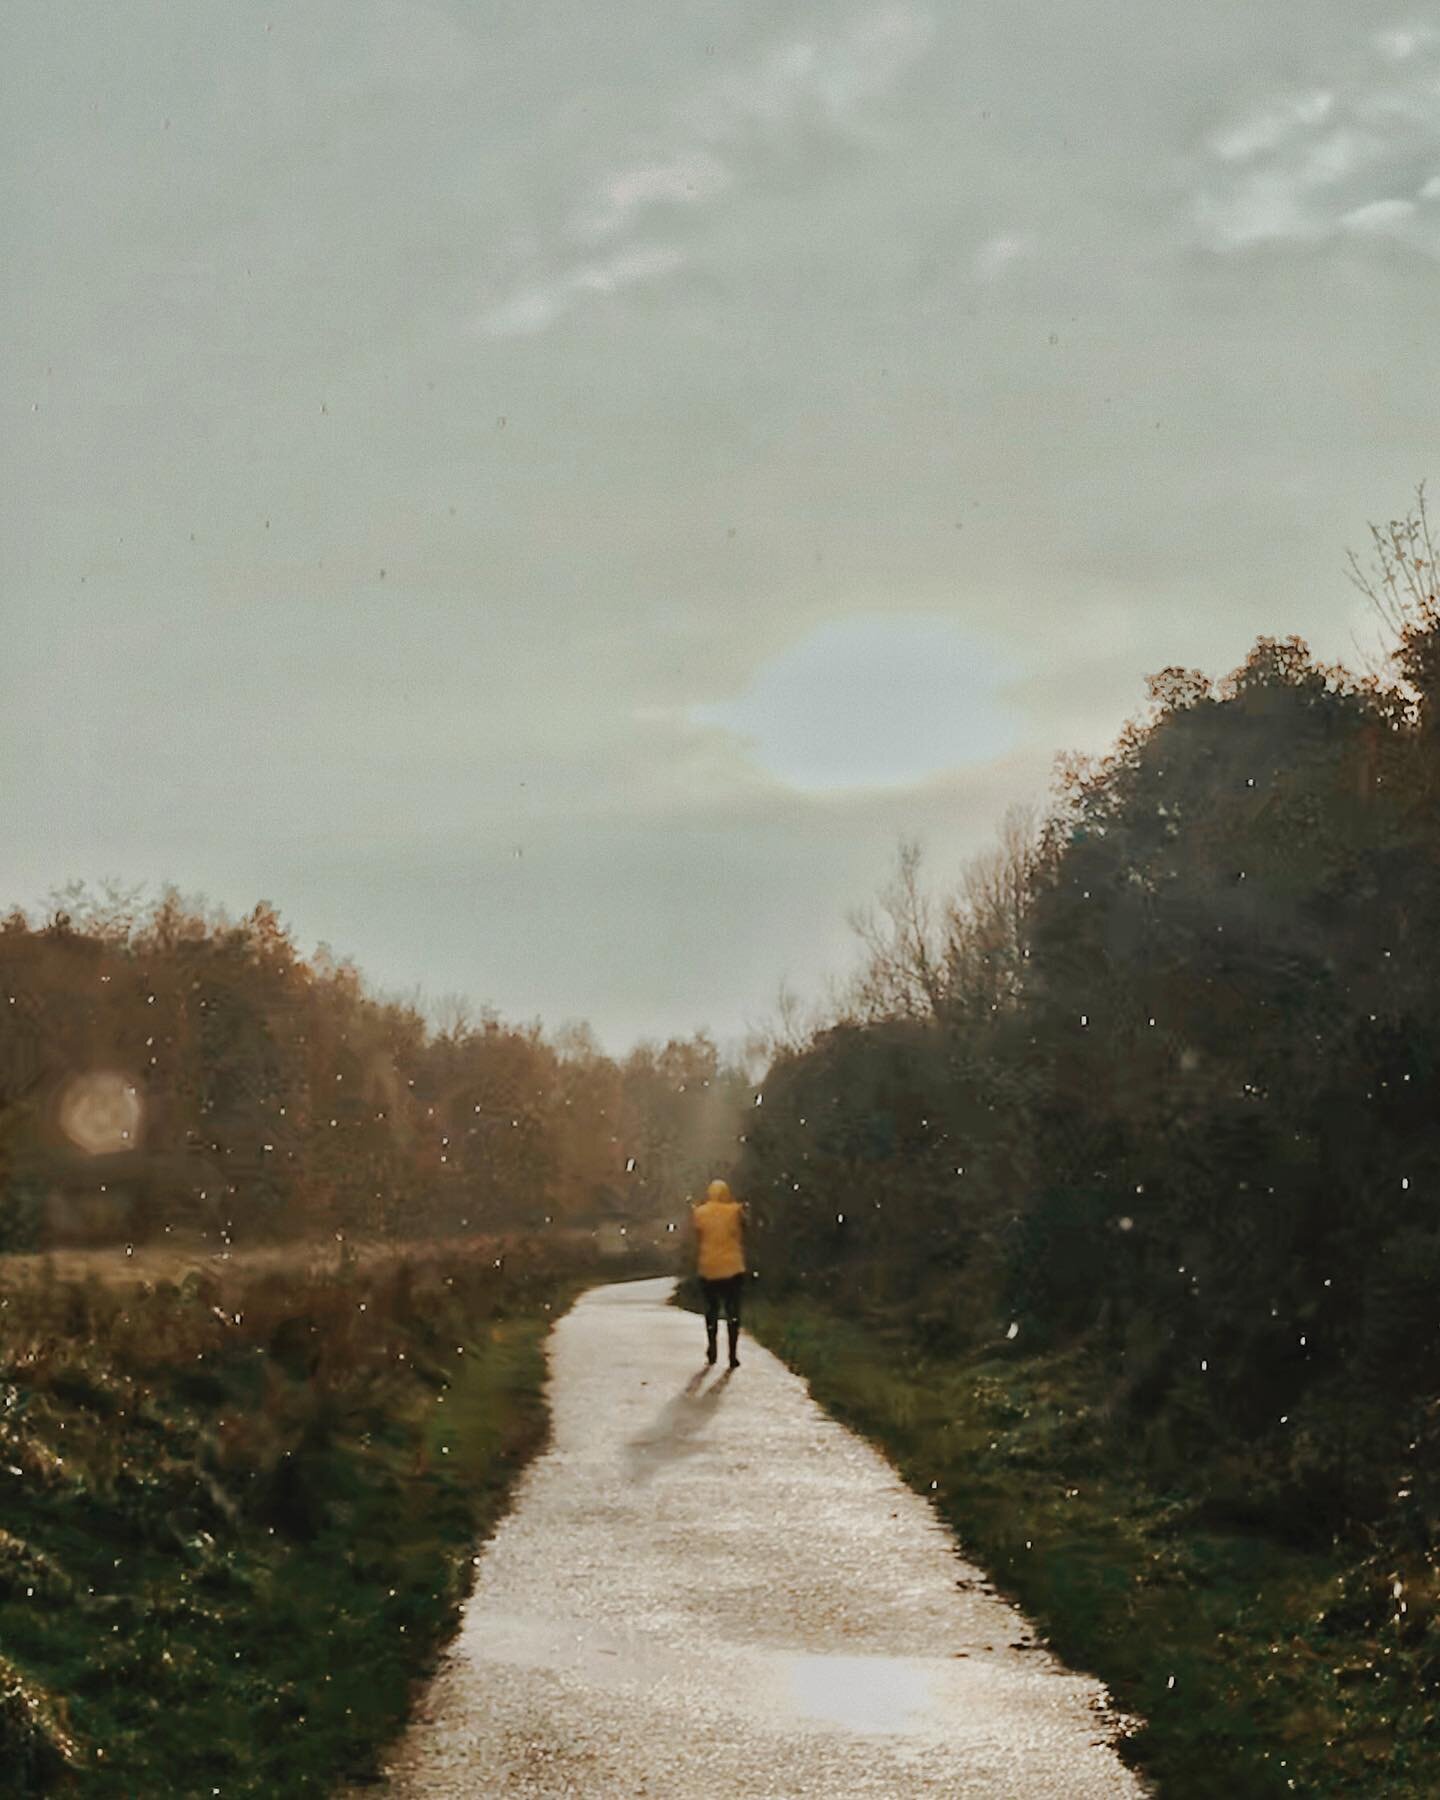 A sunny, rainy, windy walk. 
The Irish special 🌞 🌧 🌪 
I took this photo on my phone earlier today and I like how the lo-fi camera quality mixed with the heavy rain makes it look kind of like a painting. Hope everyone is feeling ok as the days are 